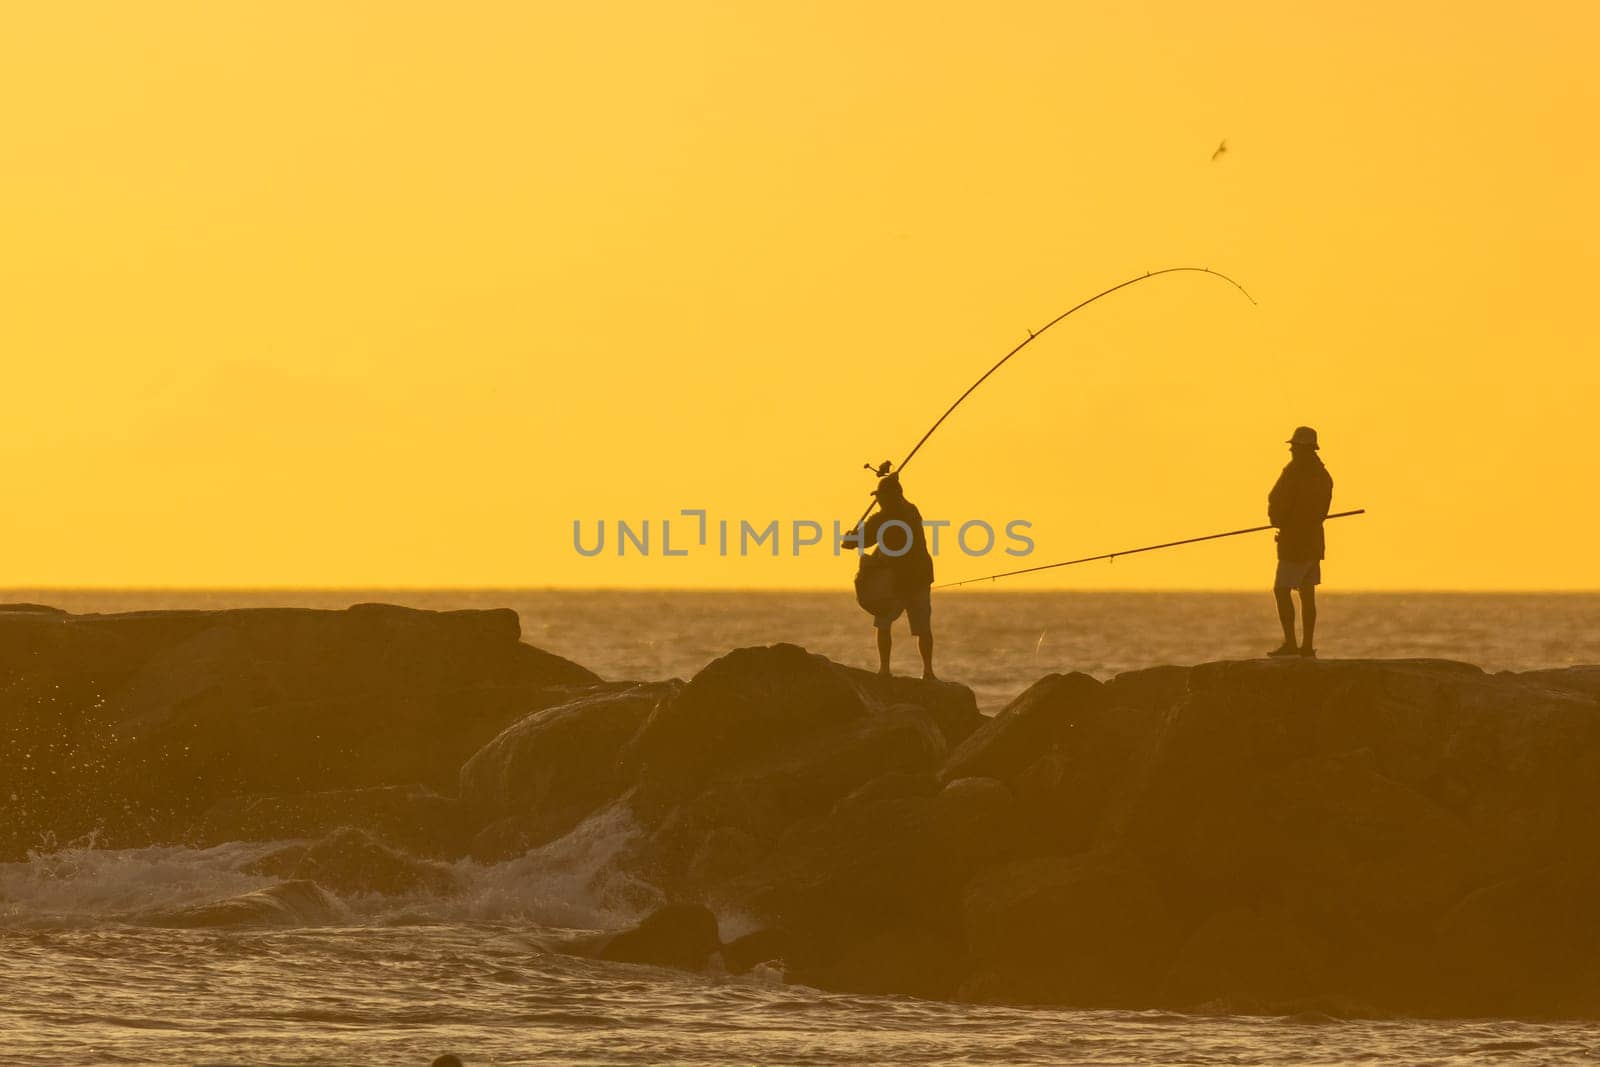 Fishermen are fishing standing on the rocks in the sea at sunset by Studia72